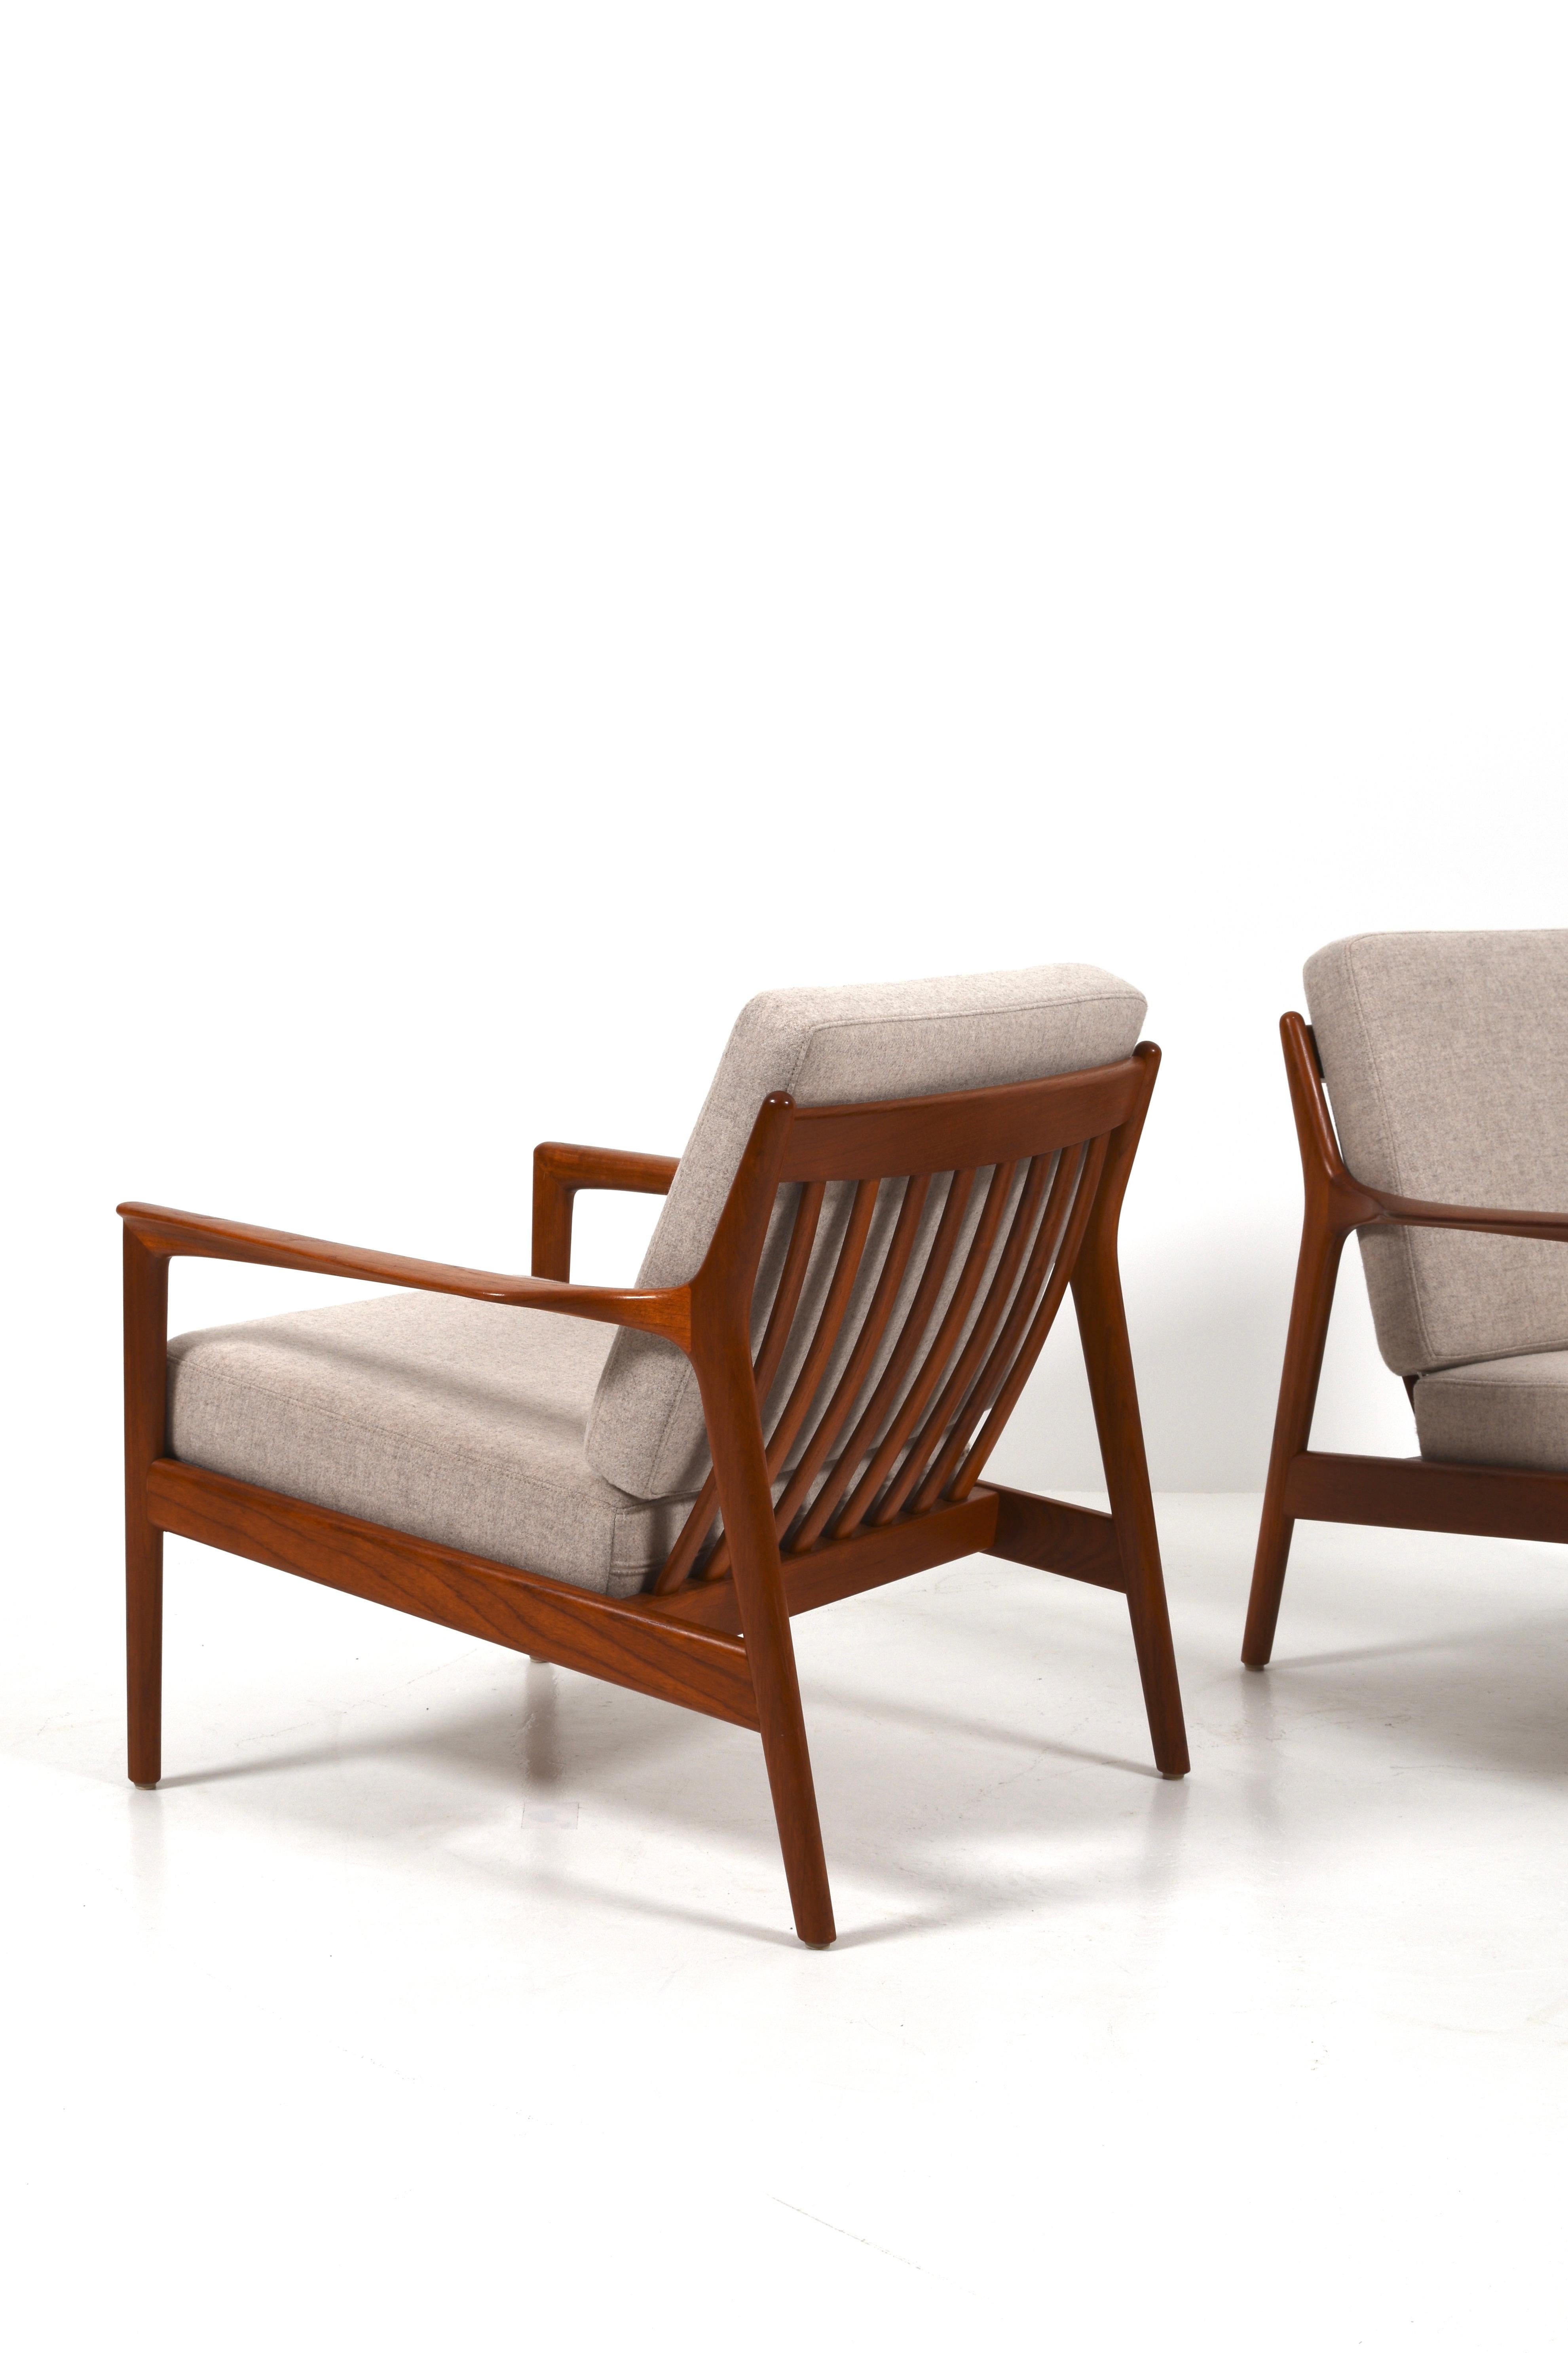 Mid-20th Century Pair of “USA 75” Teak Lounge Chairs by Folke Ohlsson for DUX, Sweden, 1960s For Sale